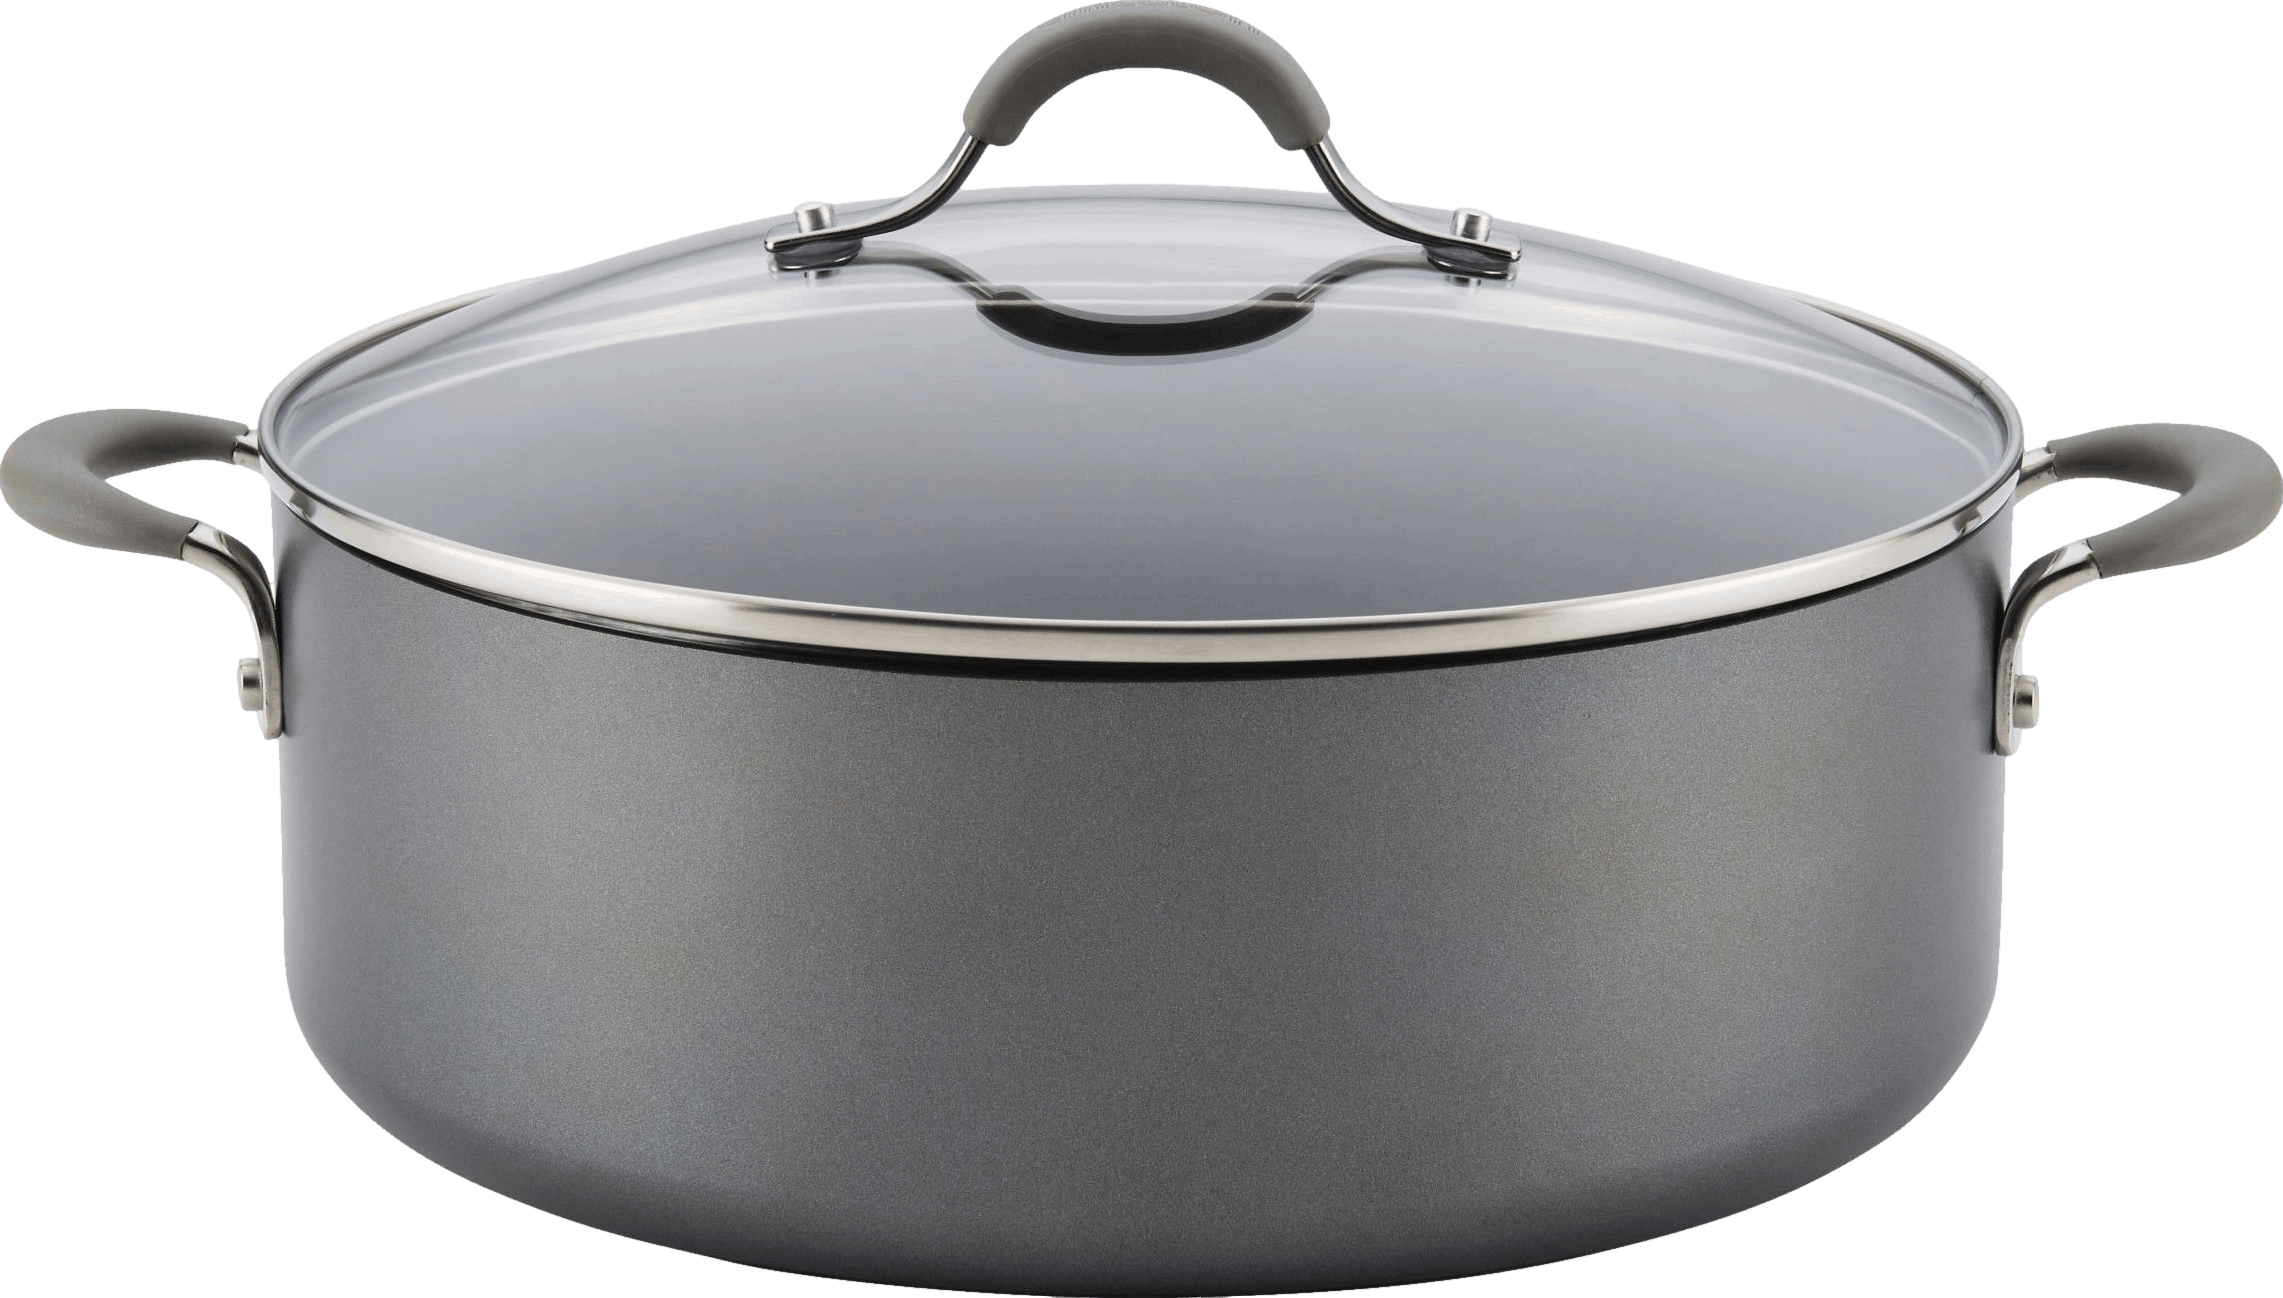 Circulon Elementum Hard-Anodized Nonstick Stockpot with Lid, 7.5-Quart, Oyster Gray